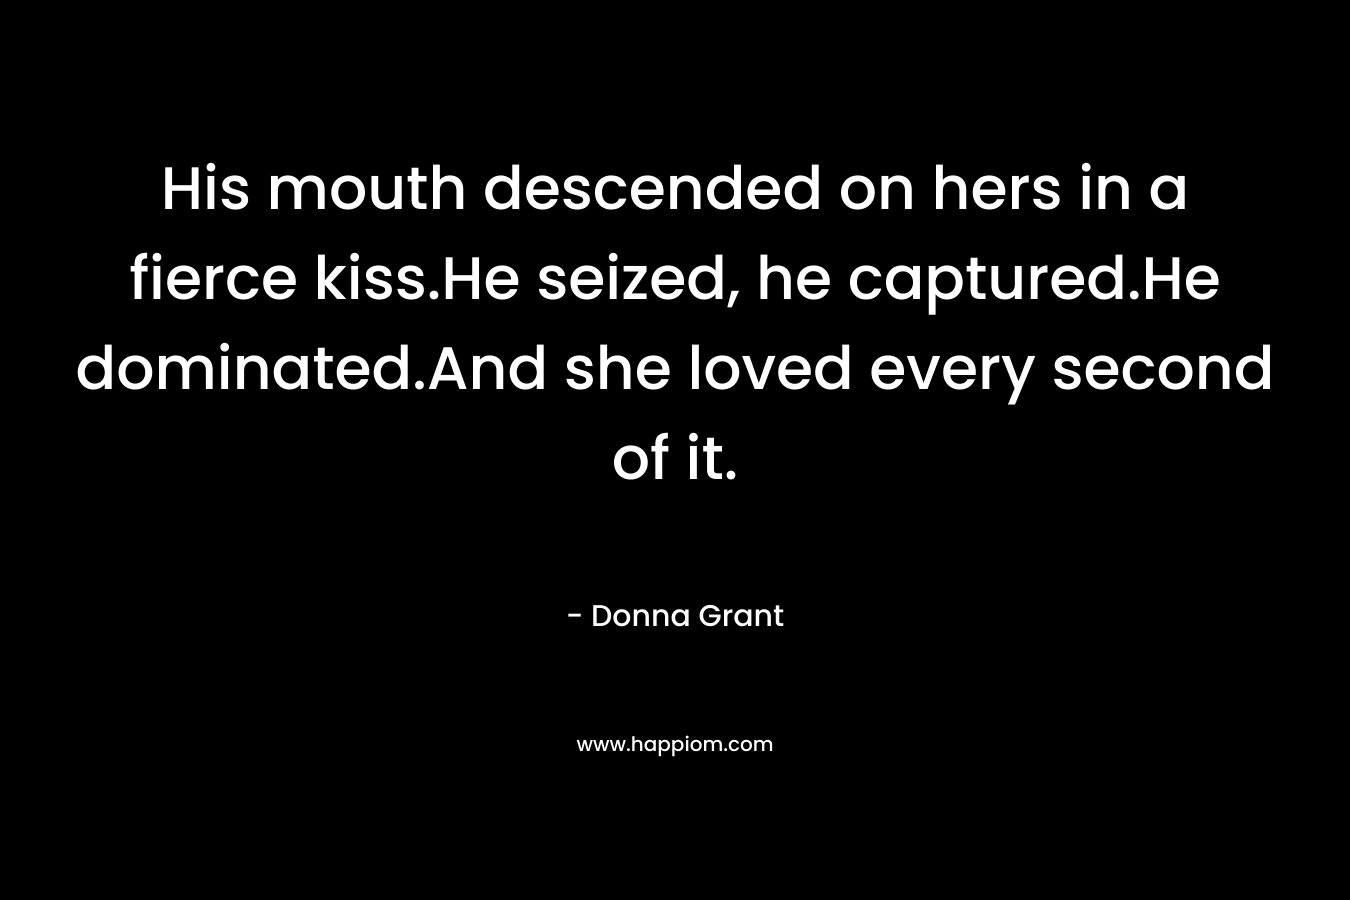 His mouth descended on hers in a fierce kiss.He seized, he captured.He dominated.And she loved every second of it. – Donna Grant